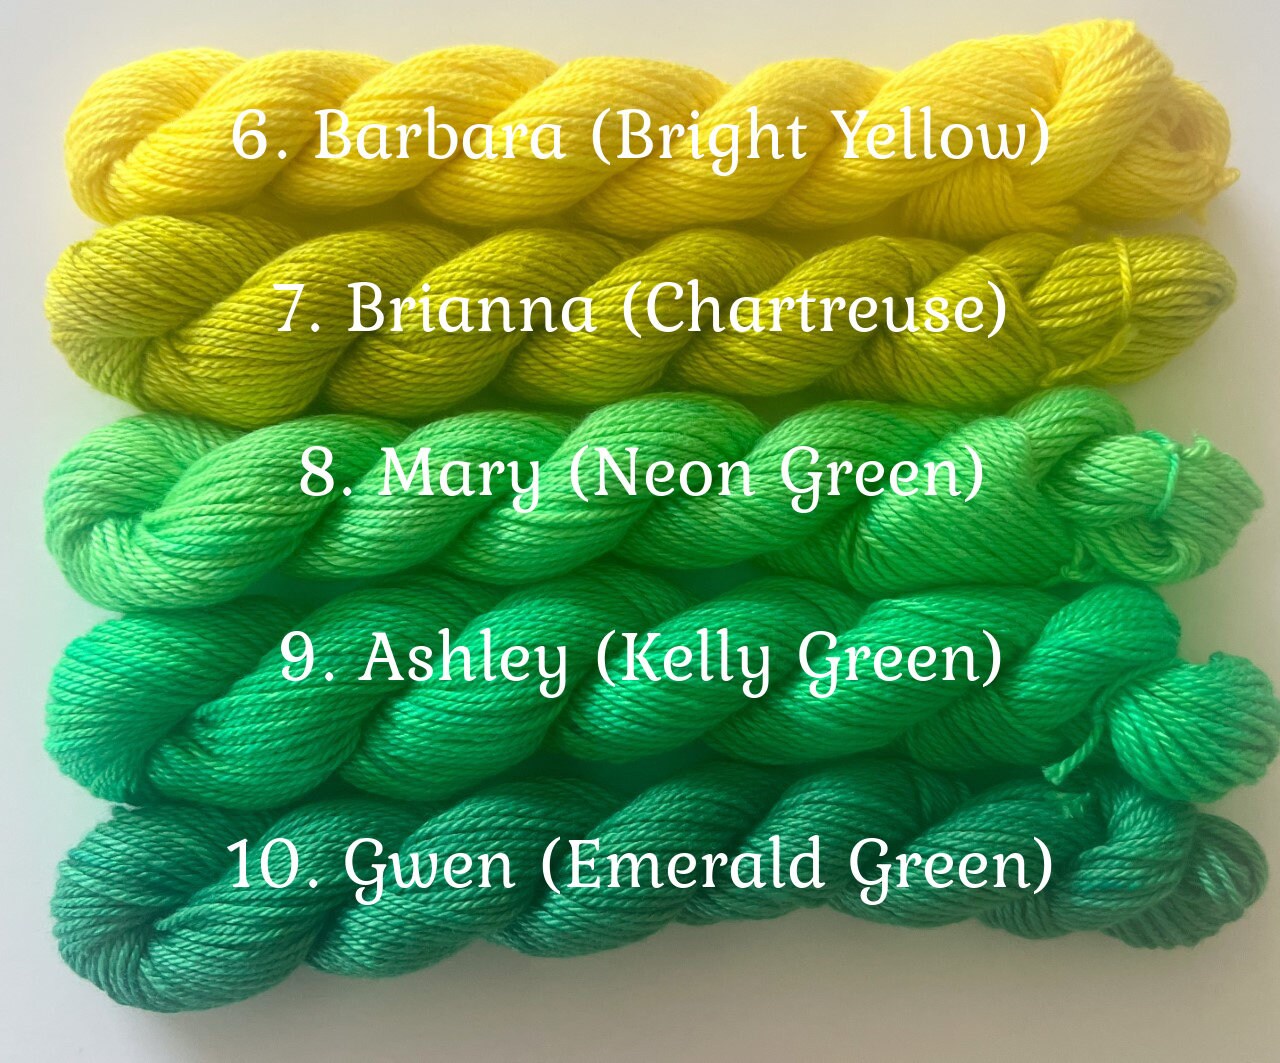 Hand Dyed Vegan Yarn Samples - 3 for 7.00 - Choose your color, receive a 3-5 yard sample on 3 different types of vegan fiber!